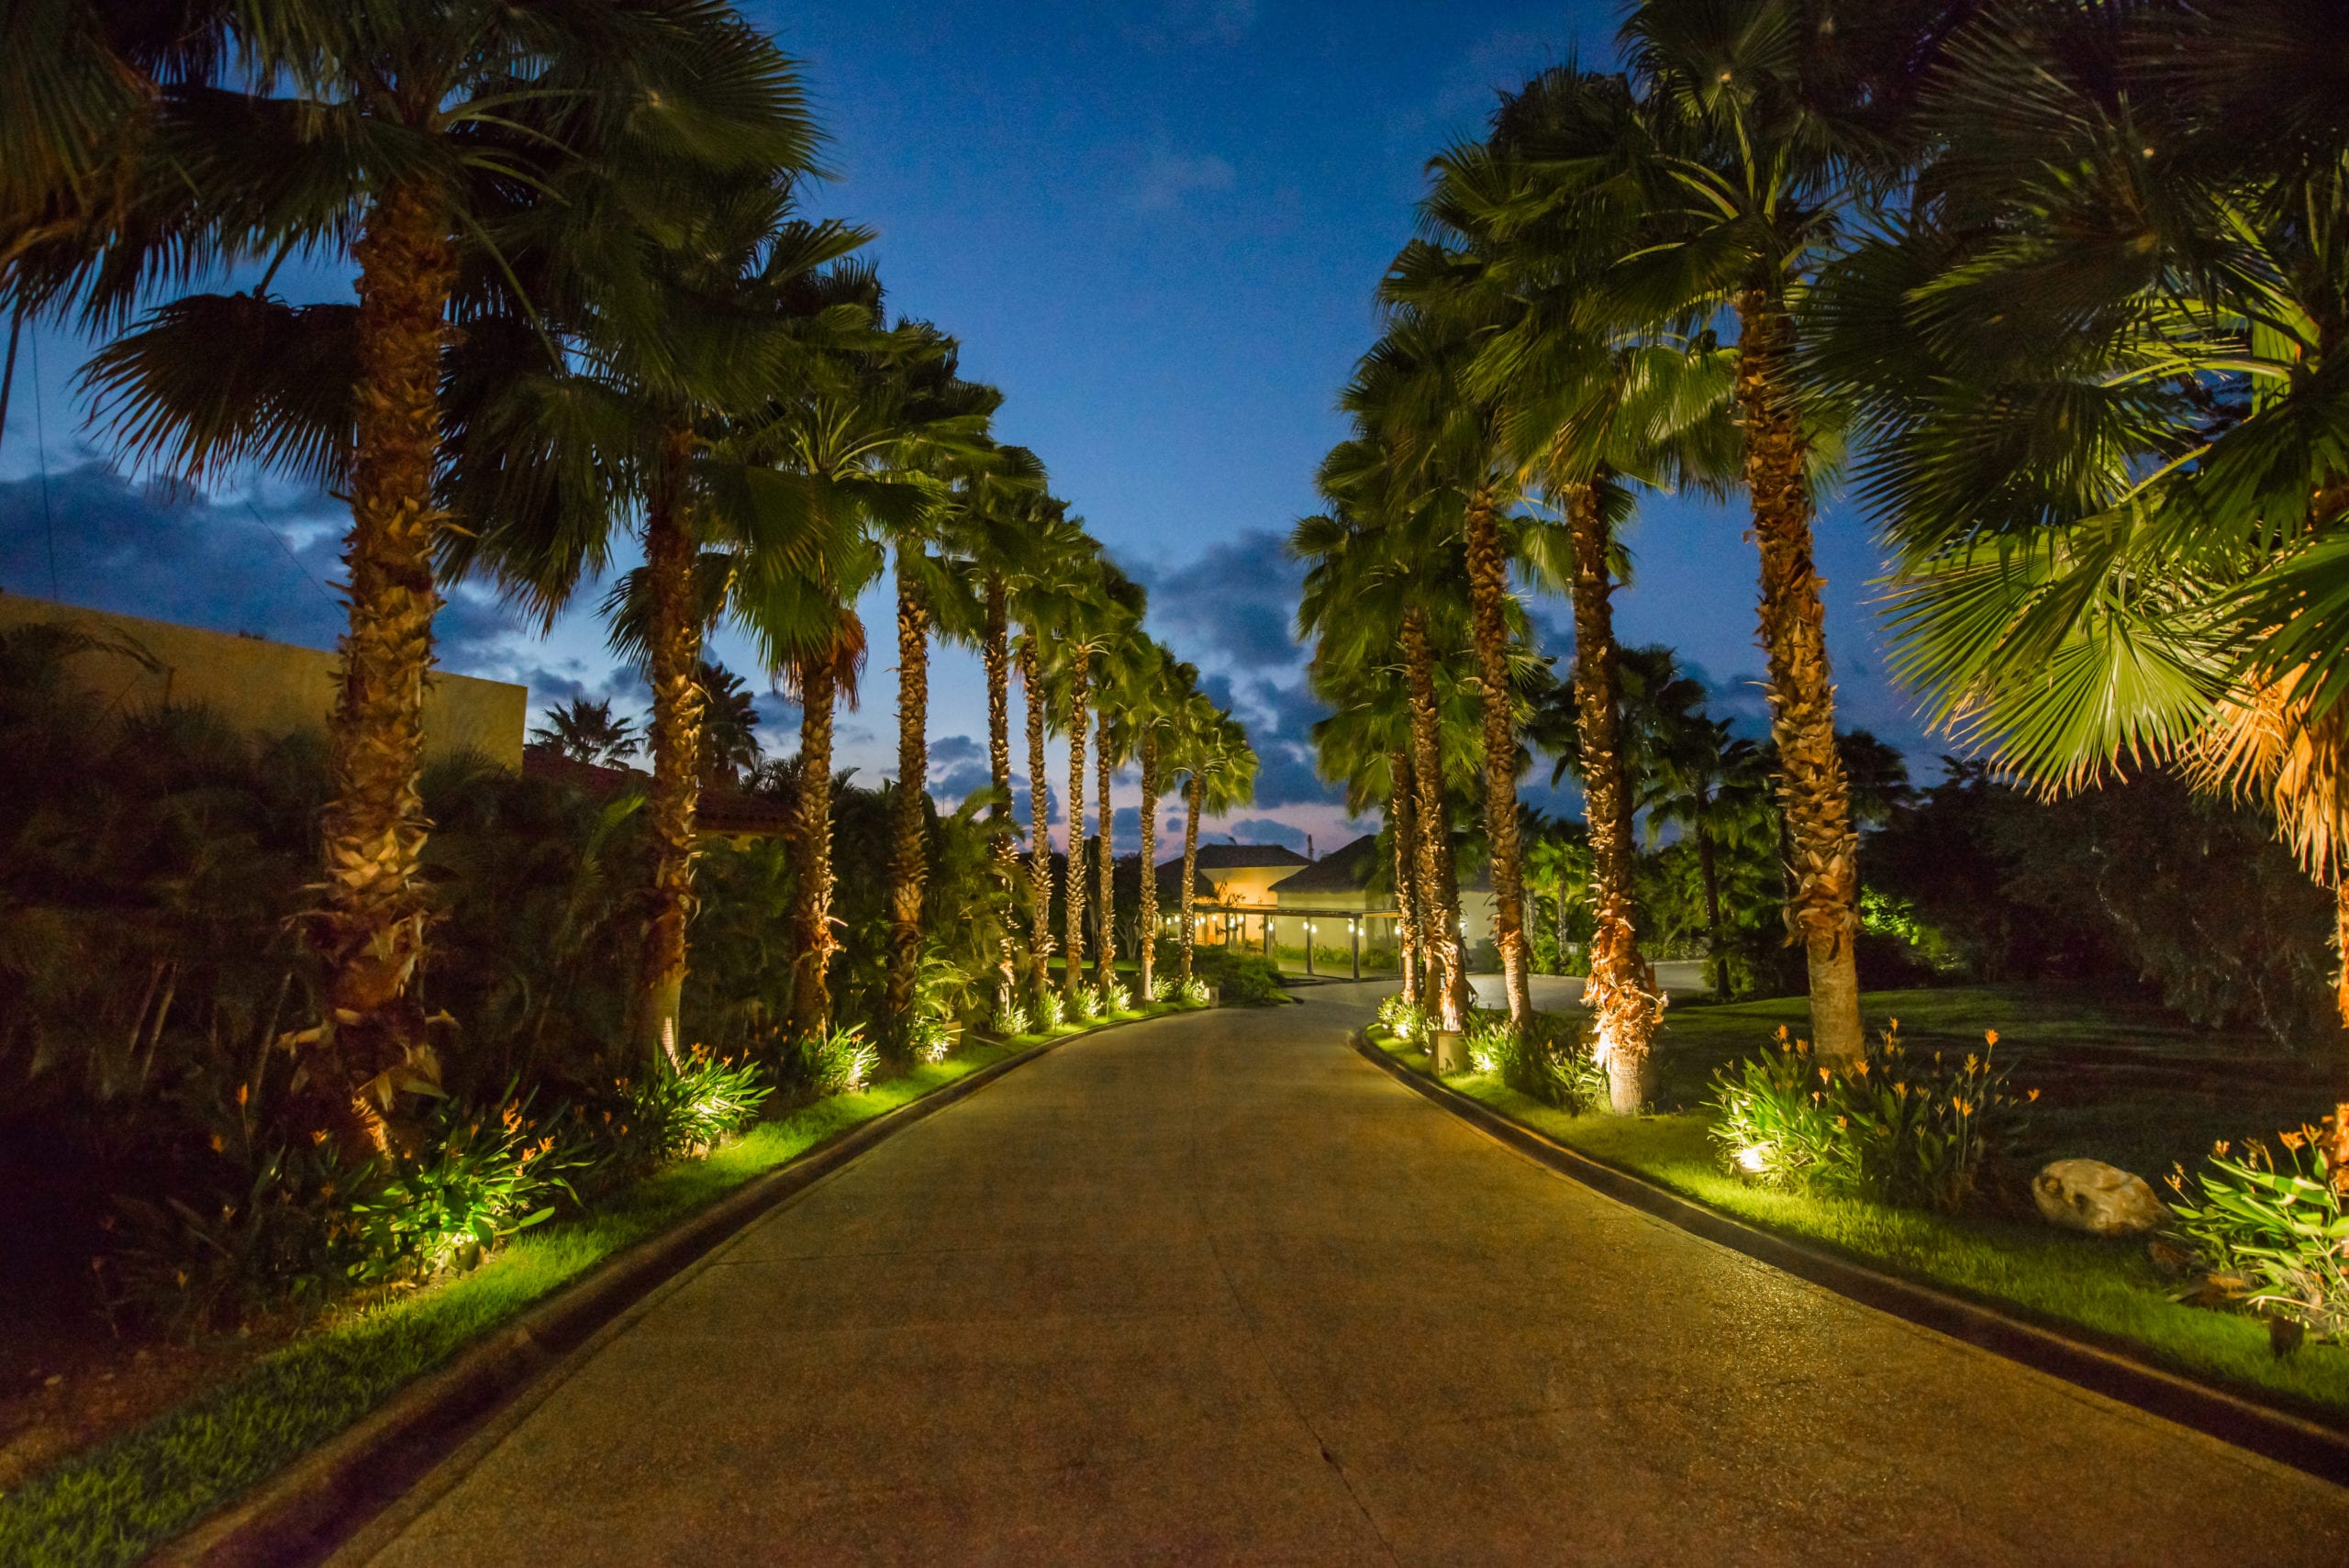 St Regis Building with walkway lined with palm trees lit up at night